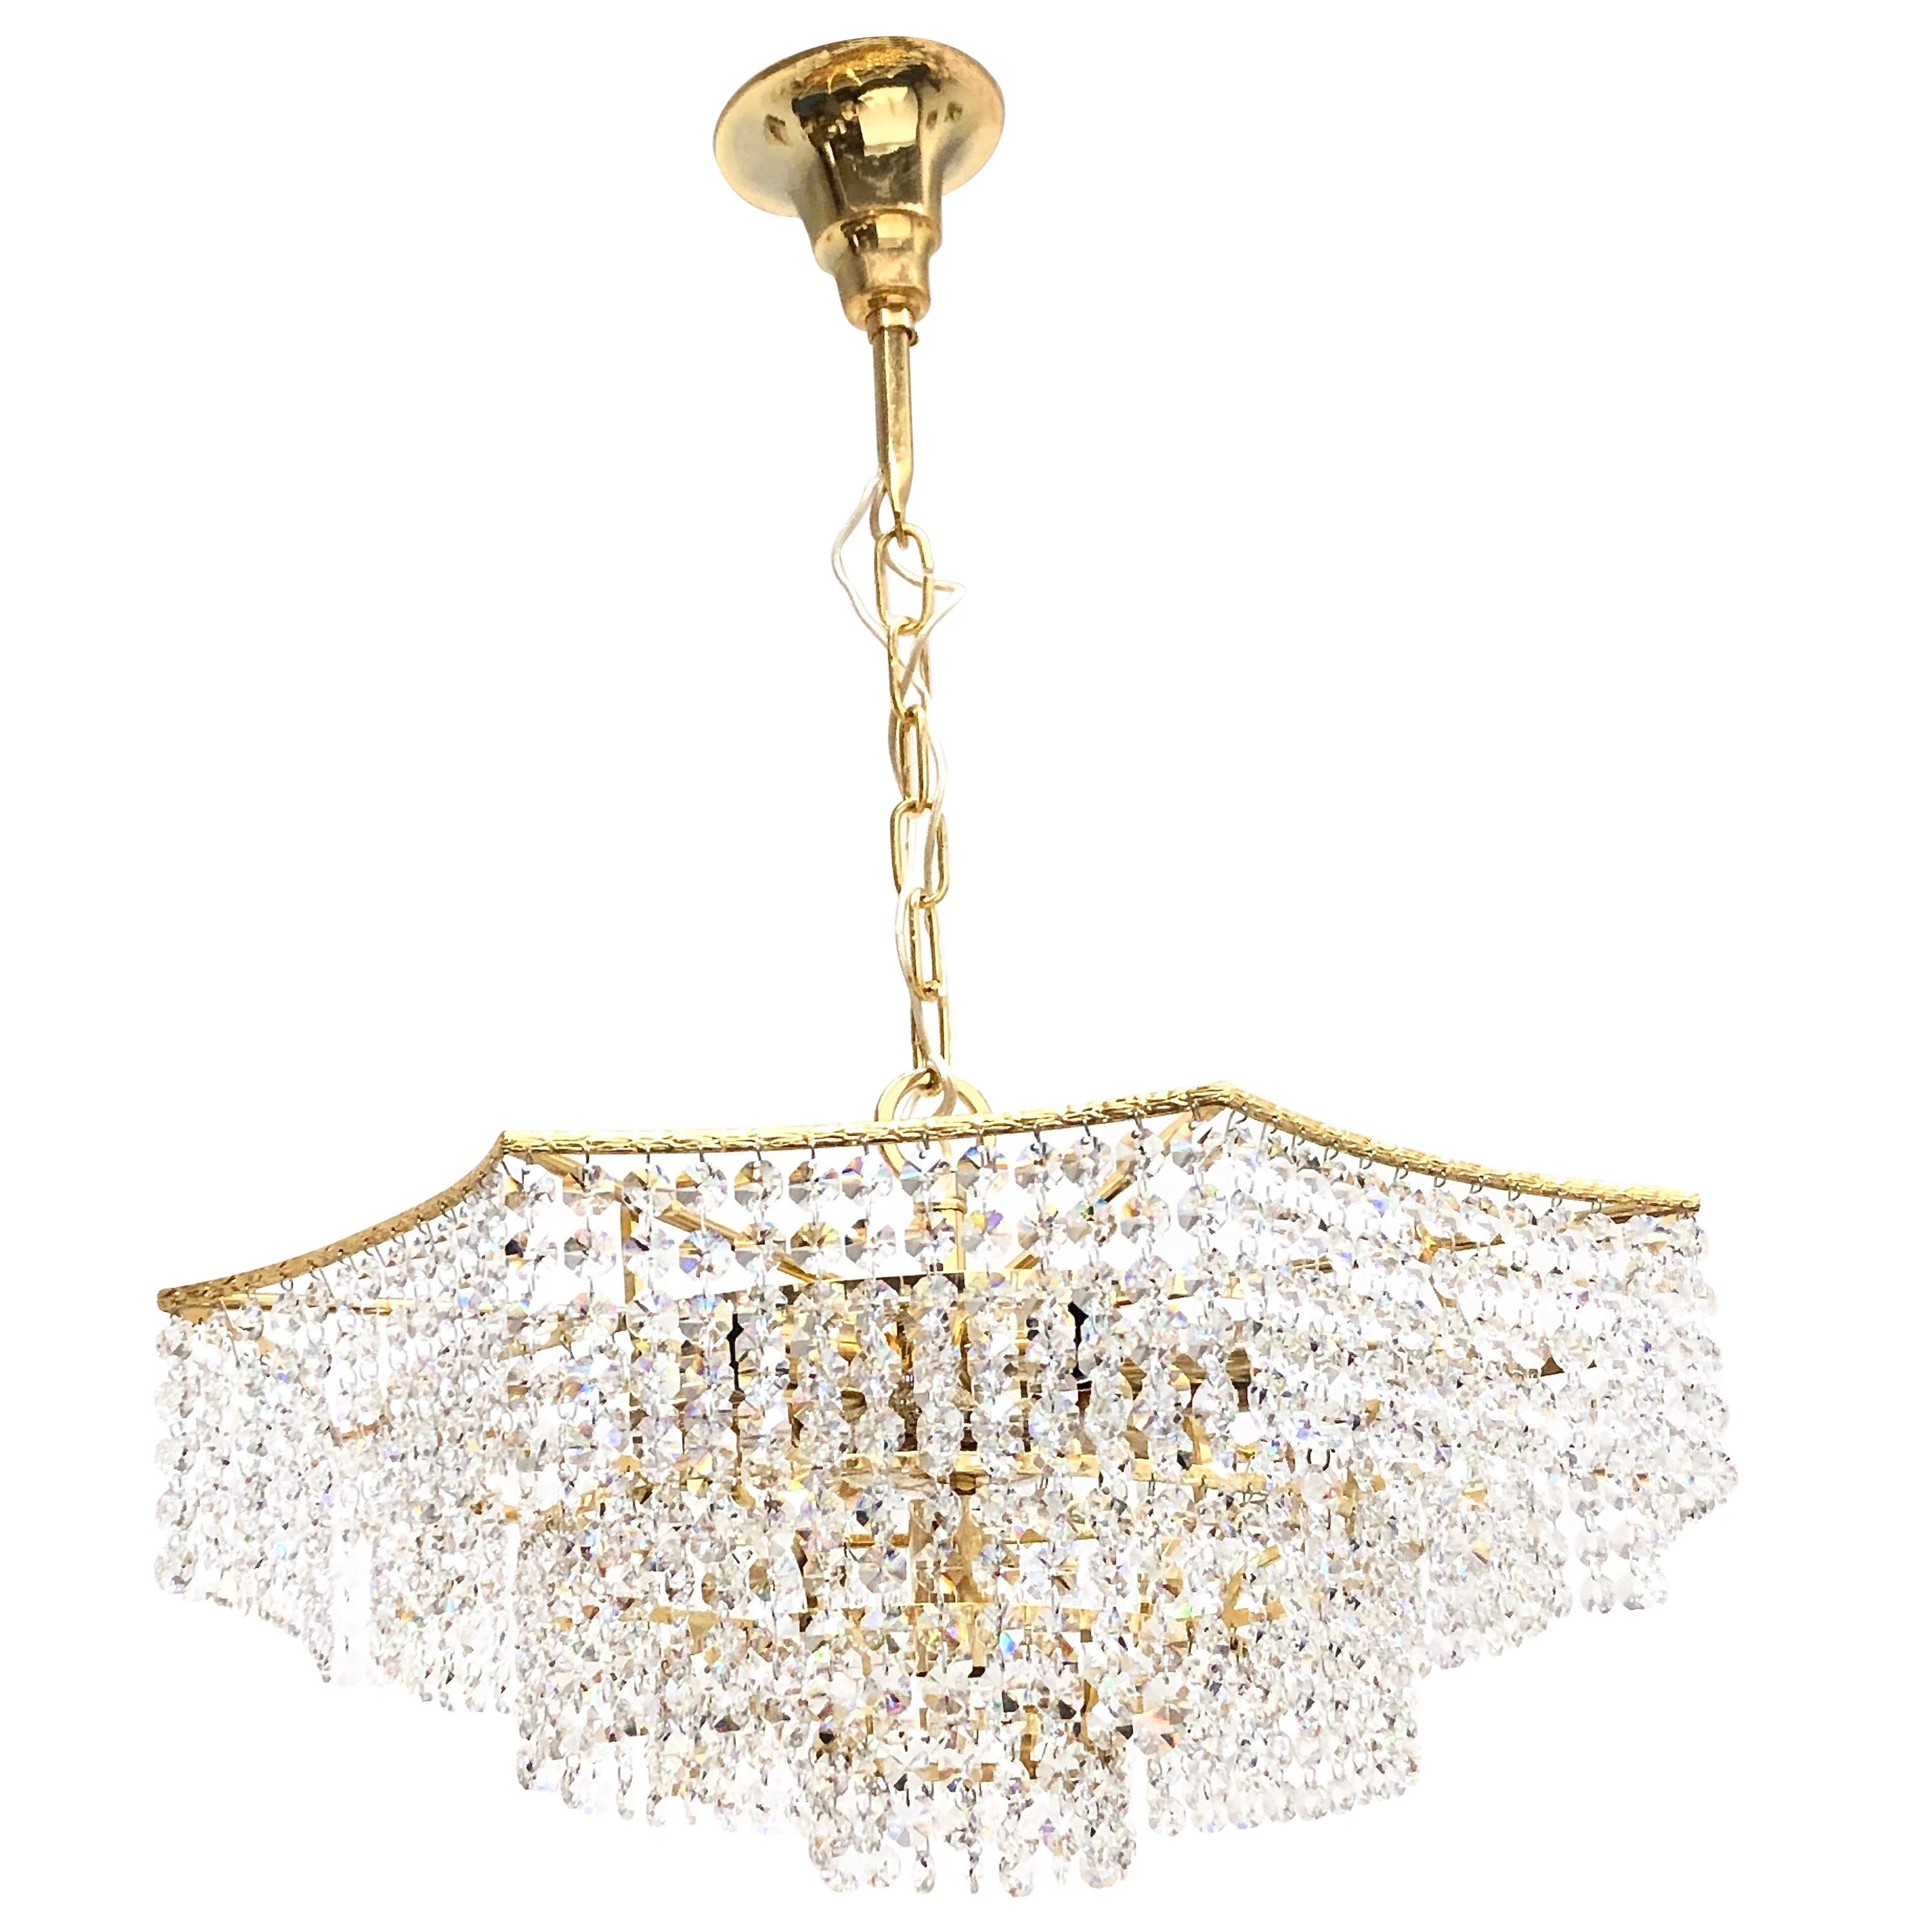 Brass and Crystal Glass Waterfall Chandelier, Richard Essig, Germany, 1960s For Sale